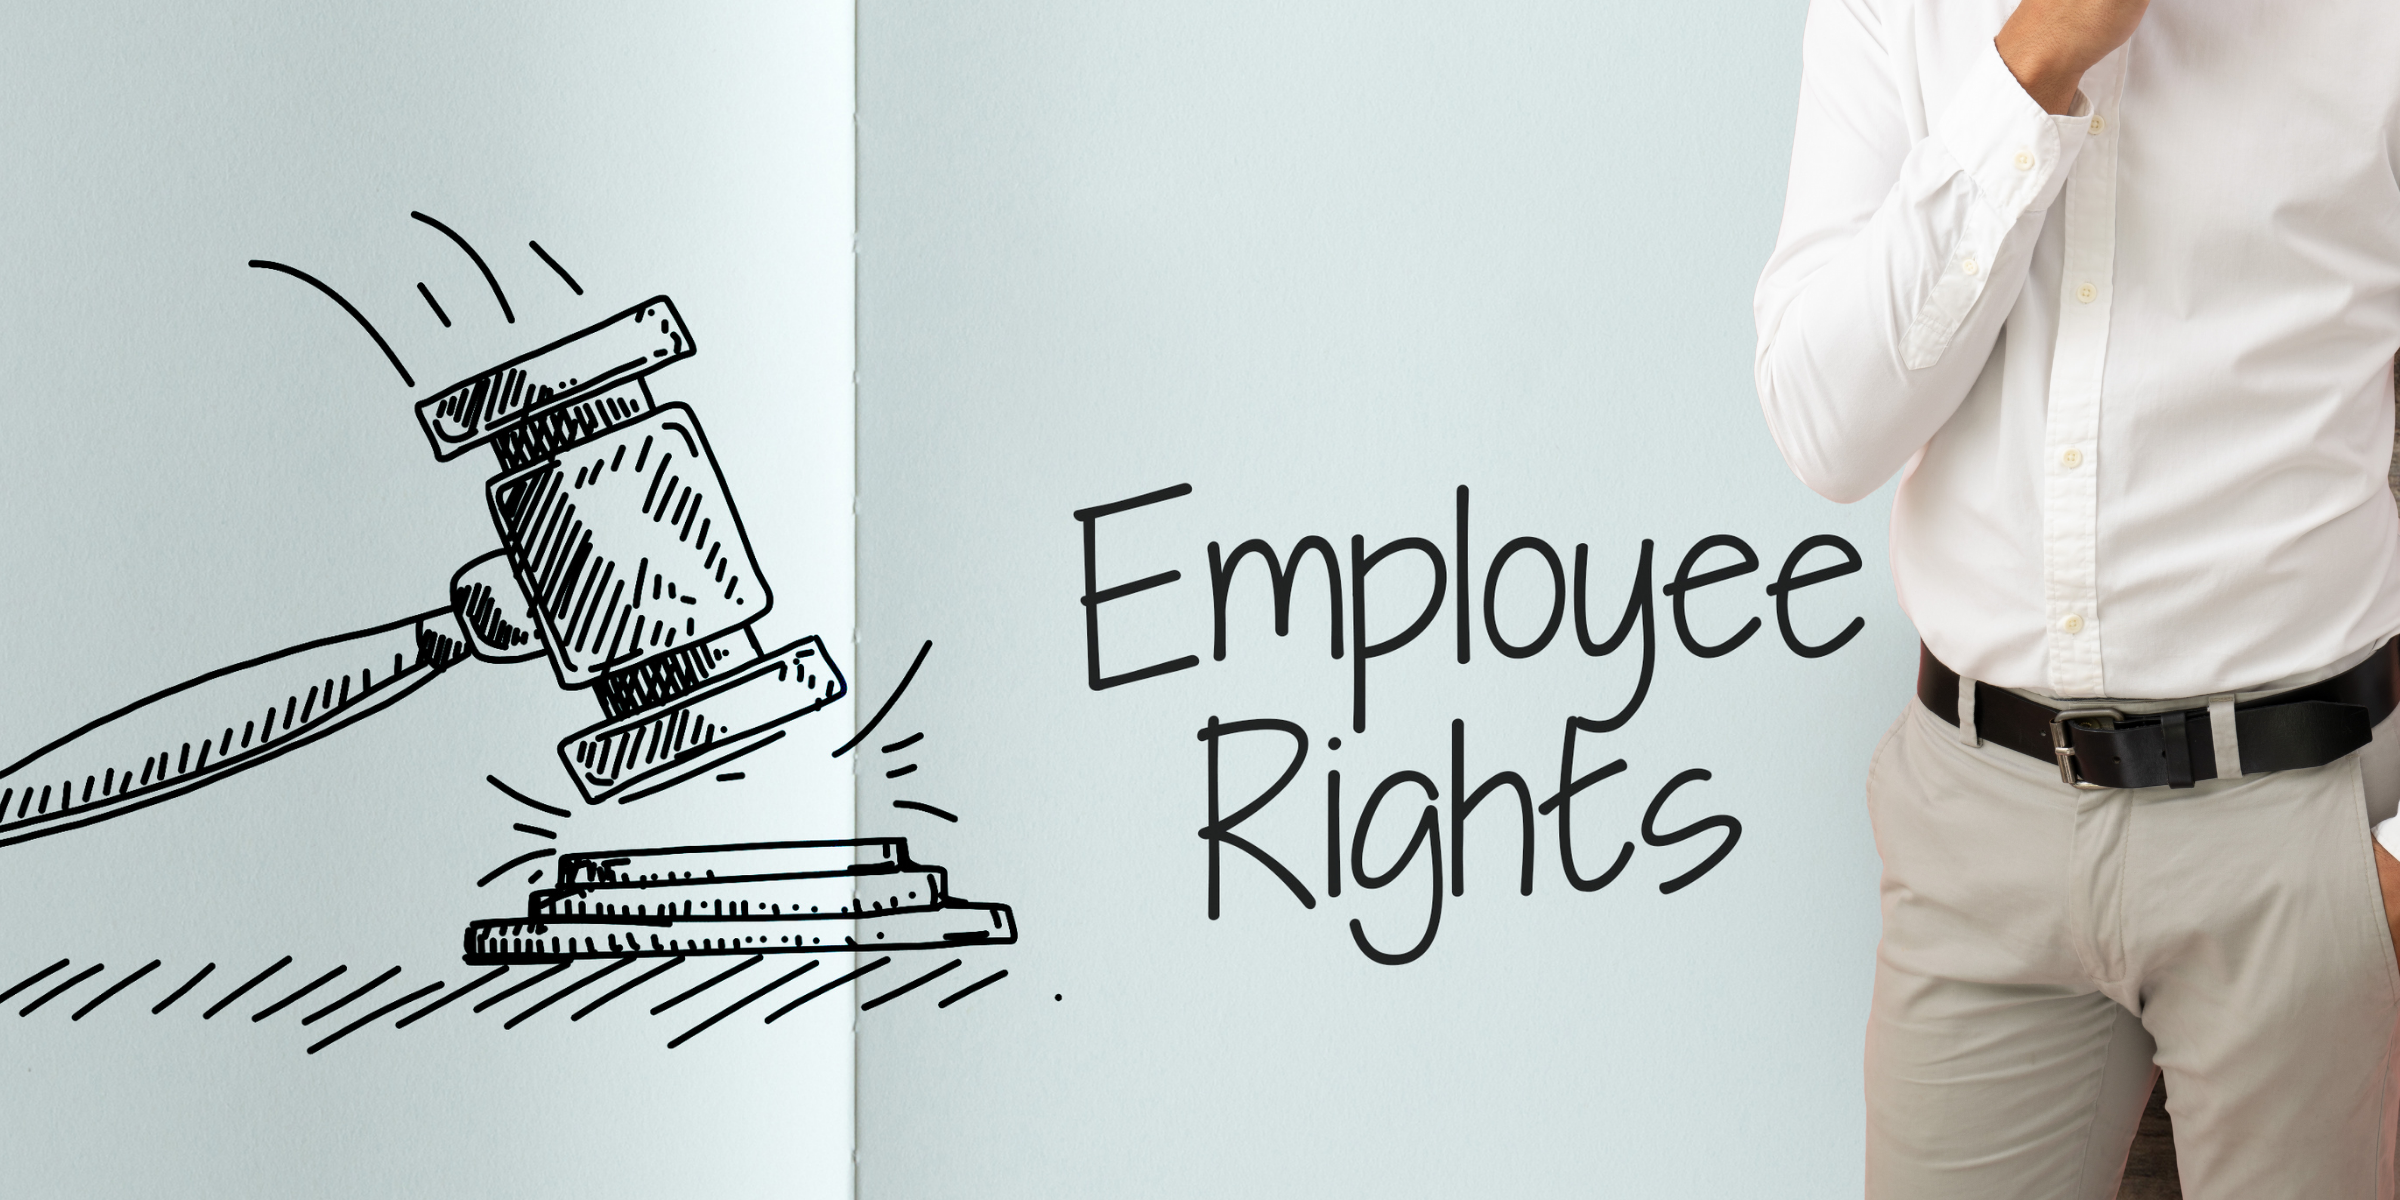 What are your rights as an employee in Nigeria?